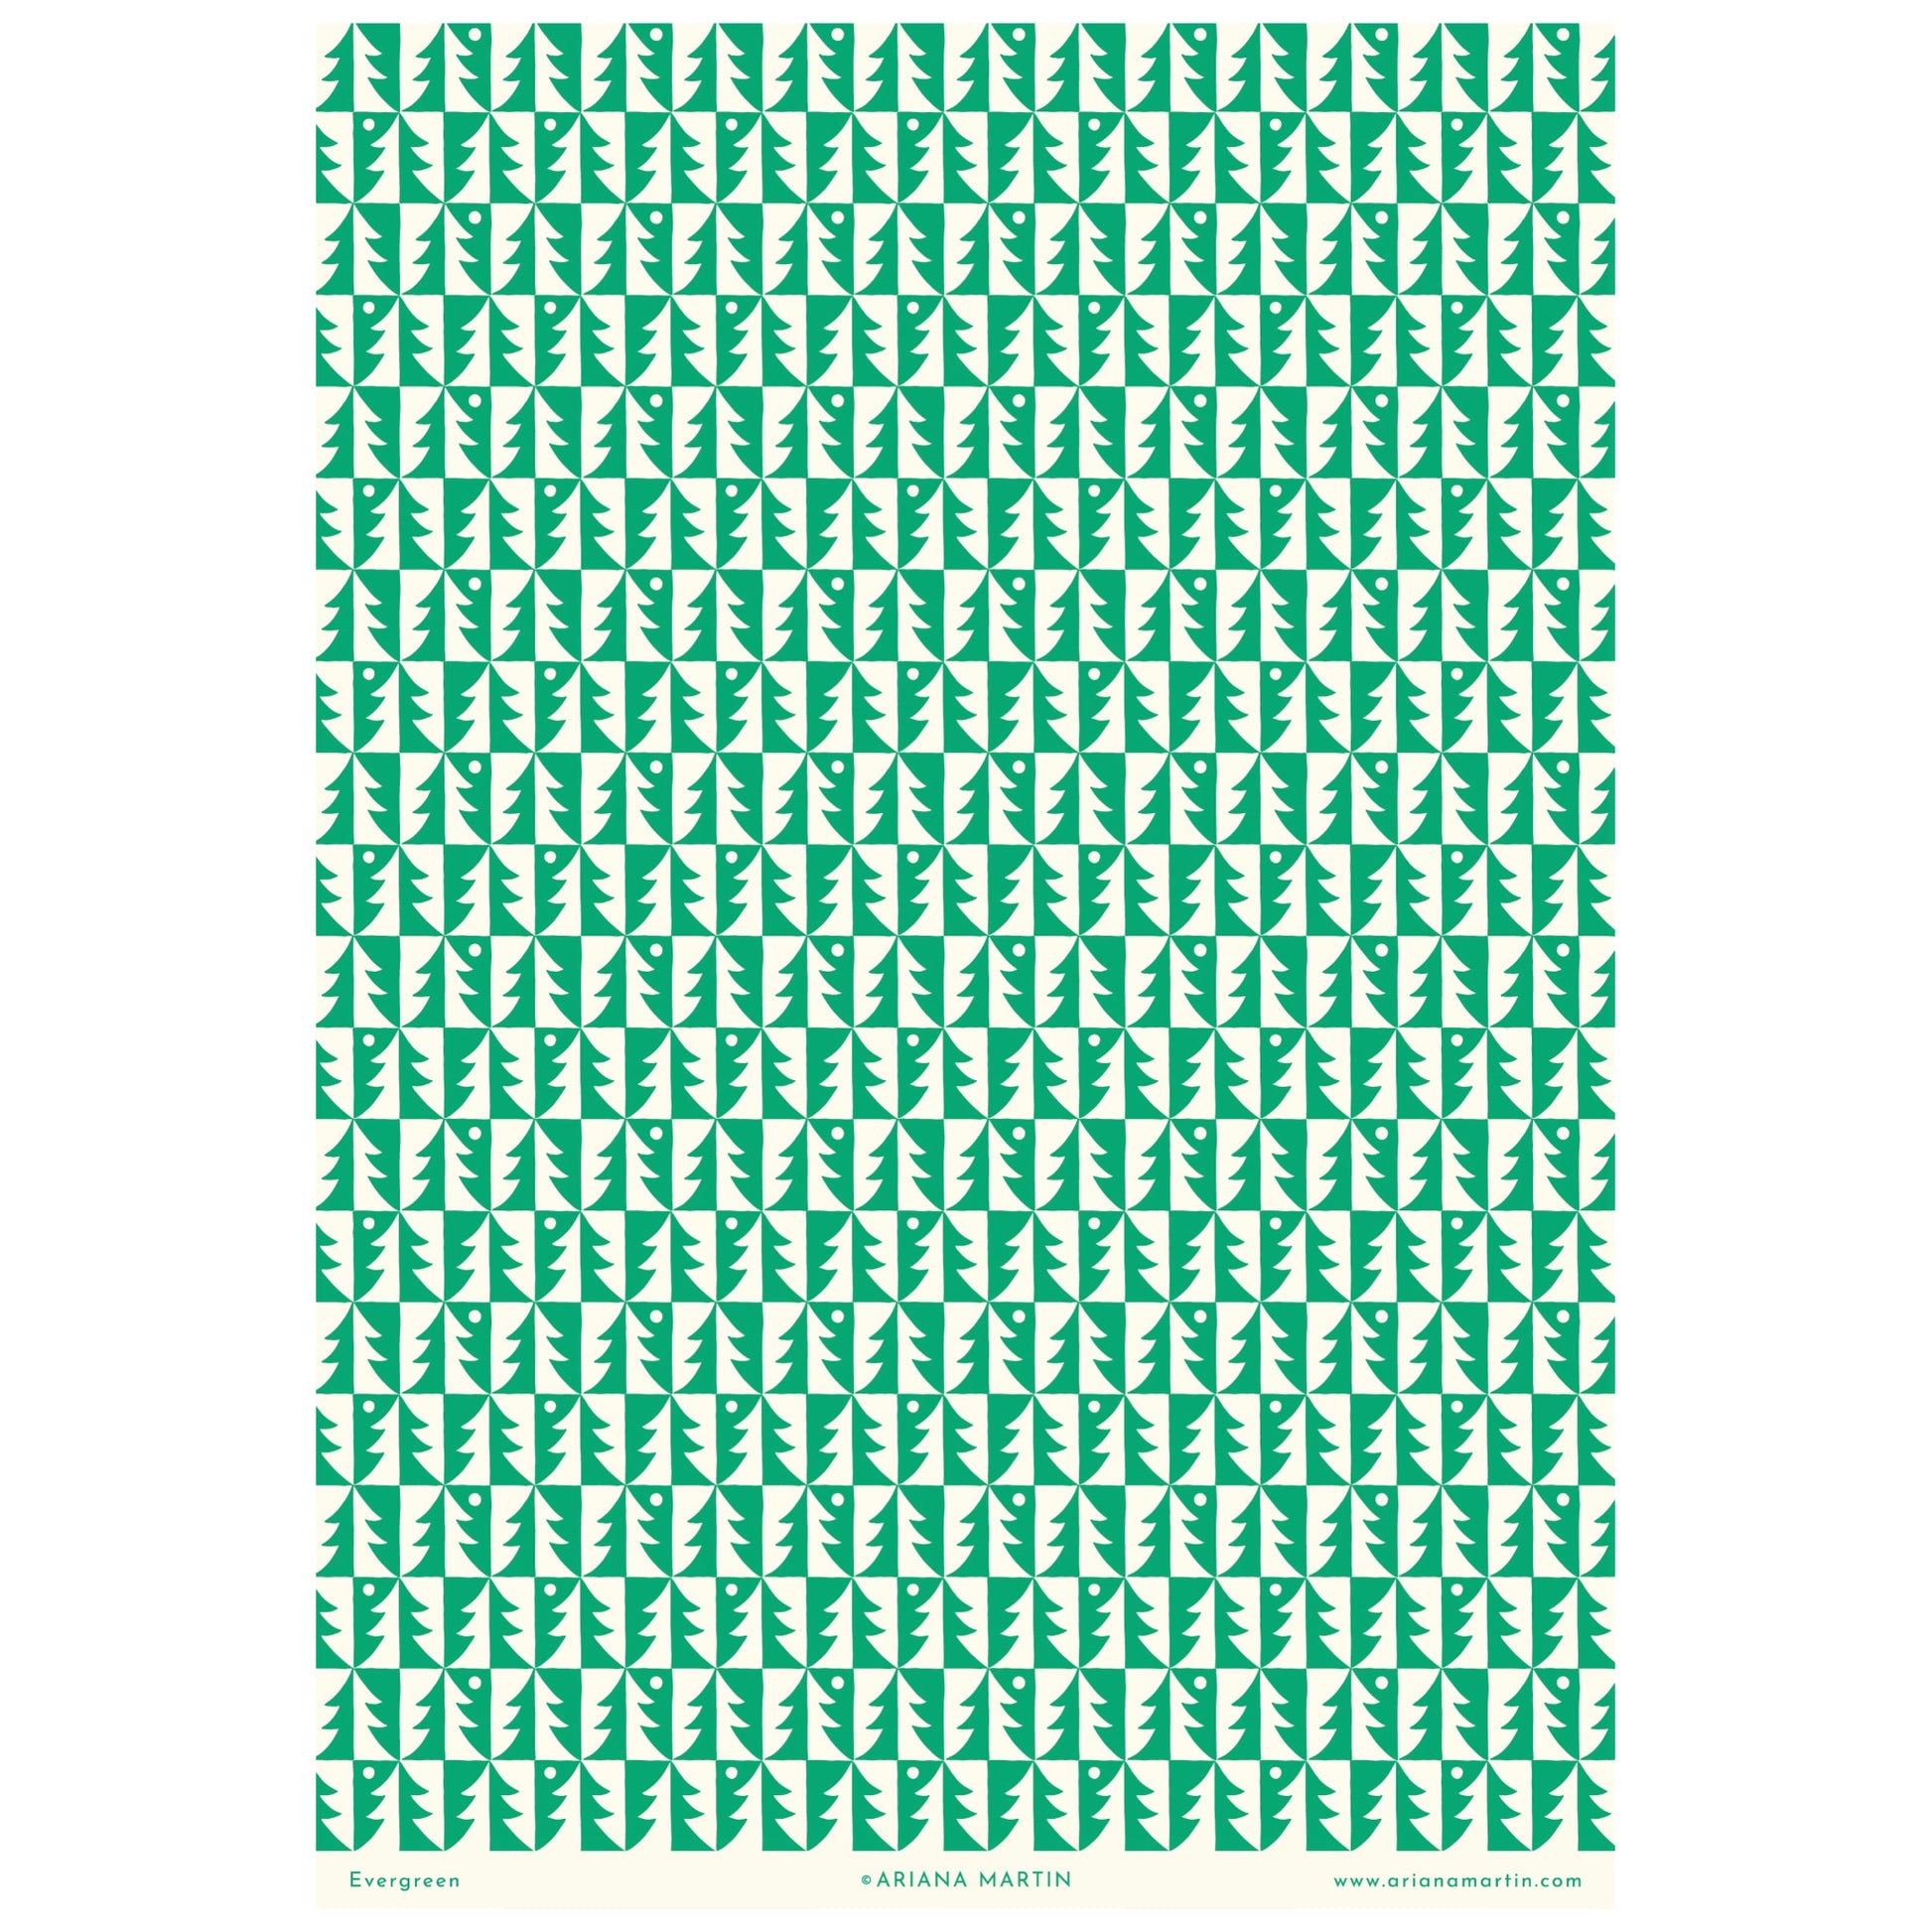 patterned paper, gift wrap, with all over pattern of green and white trees, by Ariana Martin, pictured with other papers, full sheet view